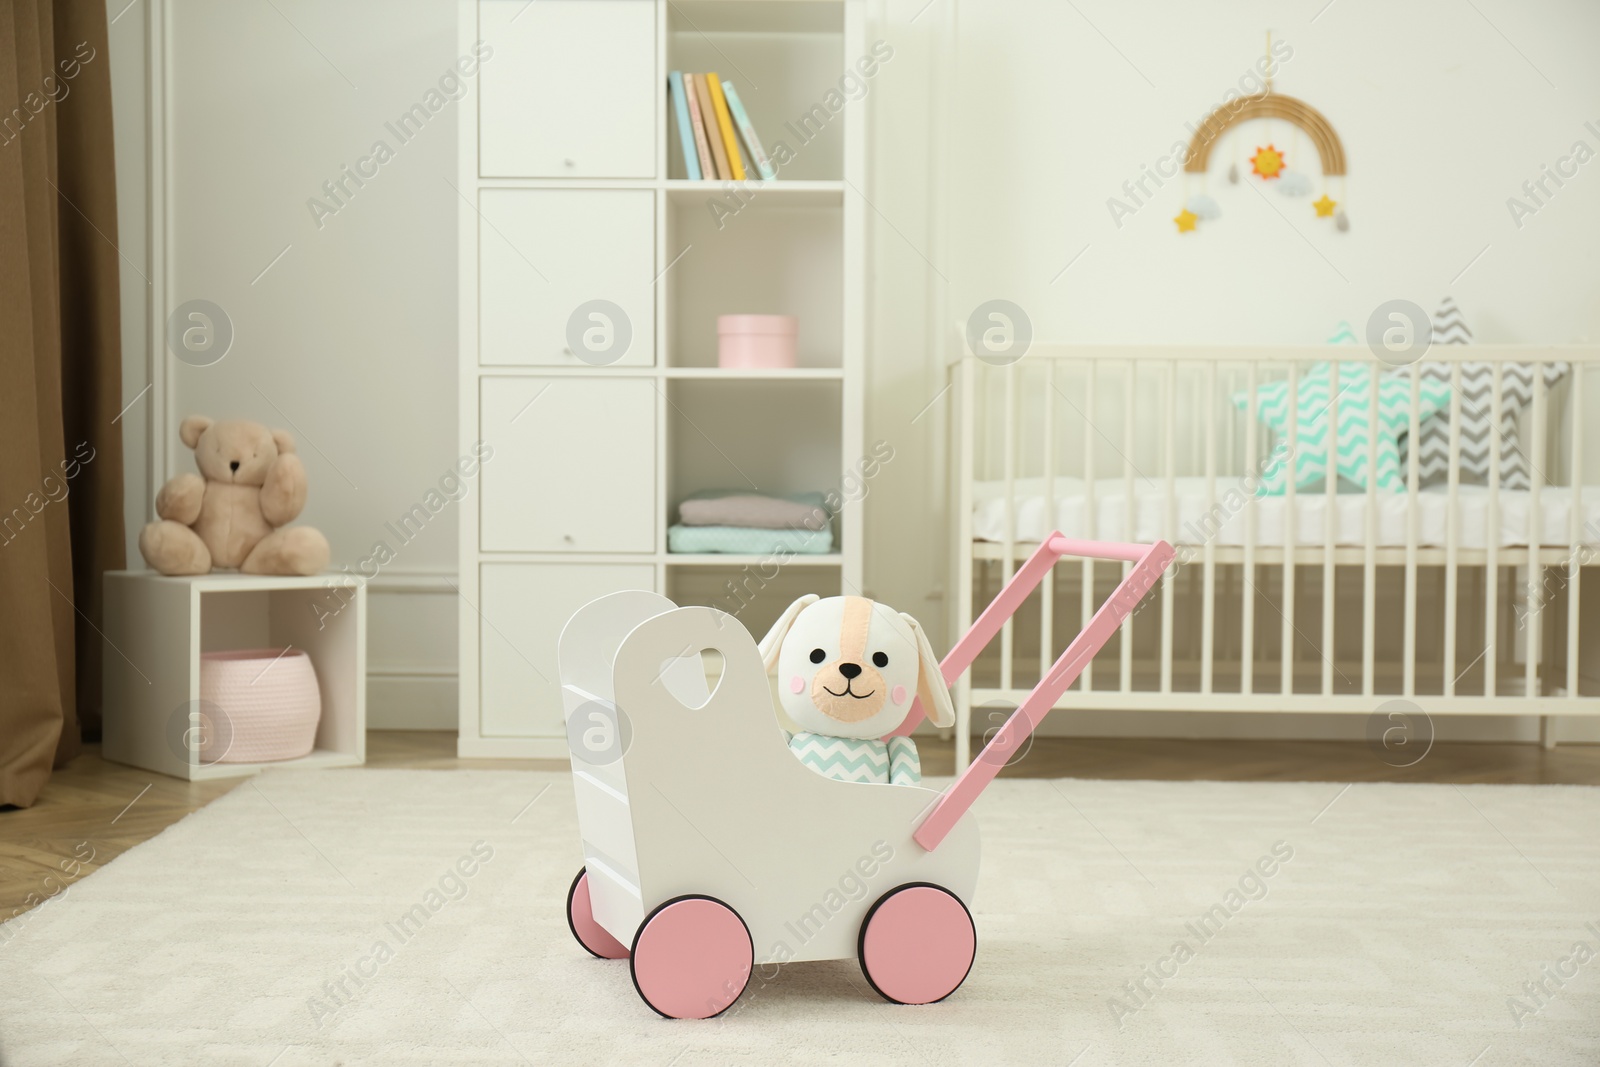 Photo of Toy walker with soft dog in baby room. Interior design